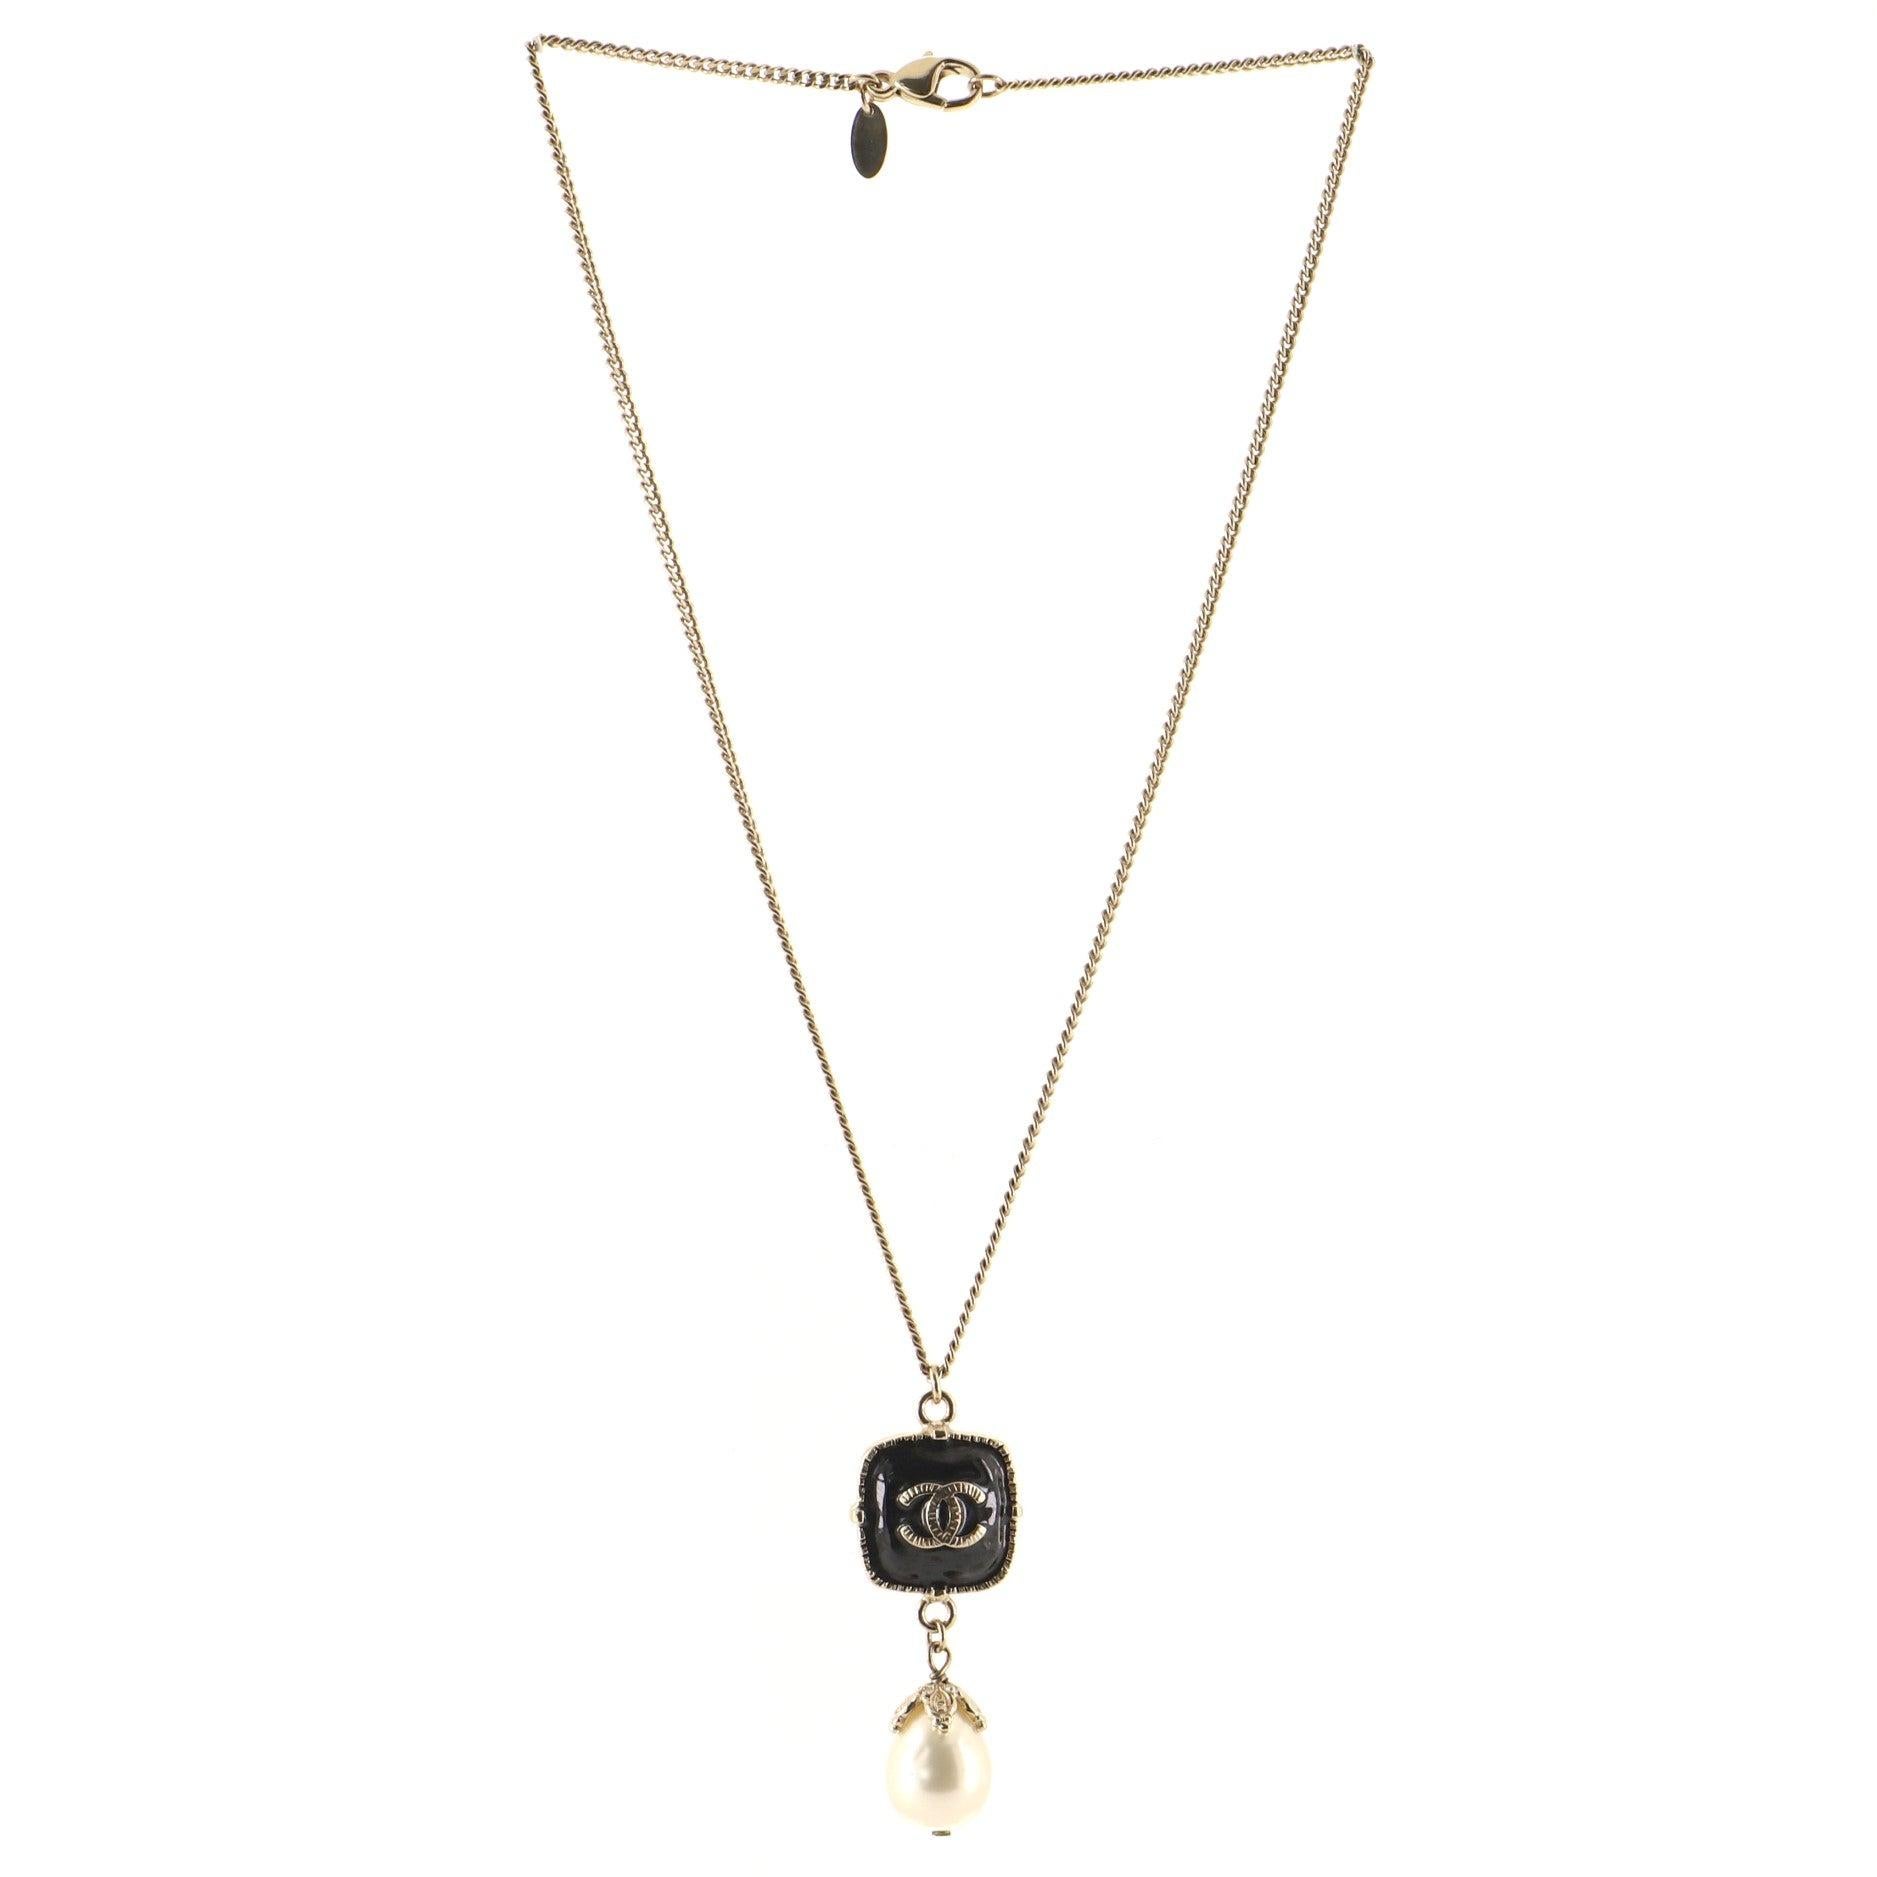 Chanel CC Pendant Necklace features a black pendant with interlocking CC logo, faux pearl drop, gold-tone long chain and lobster clasp closure.


63736MSC